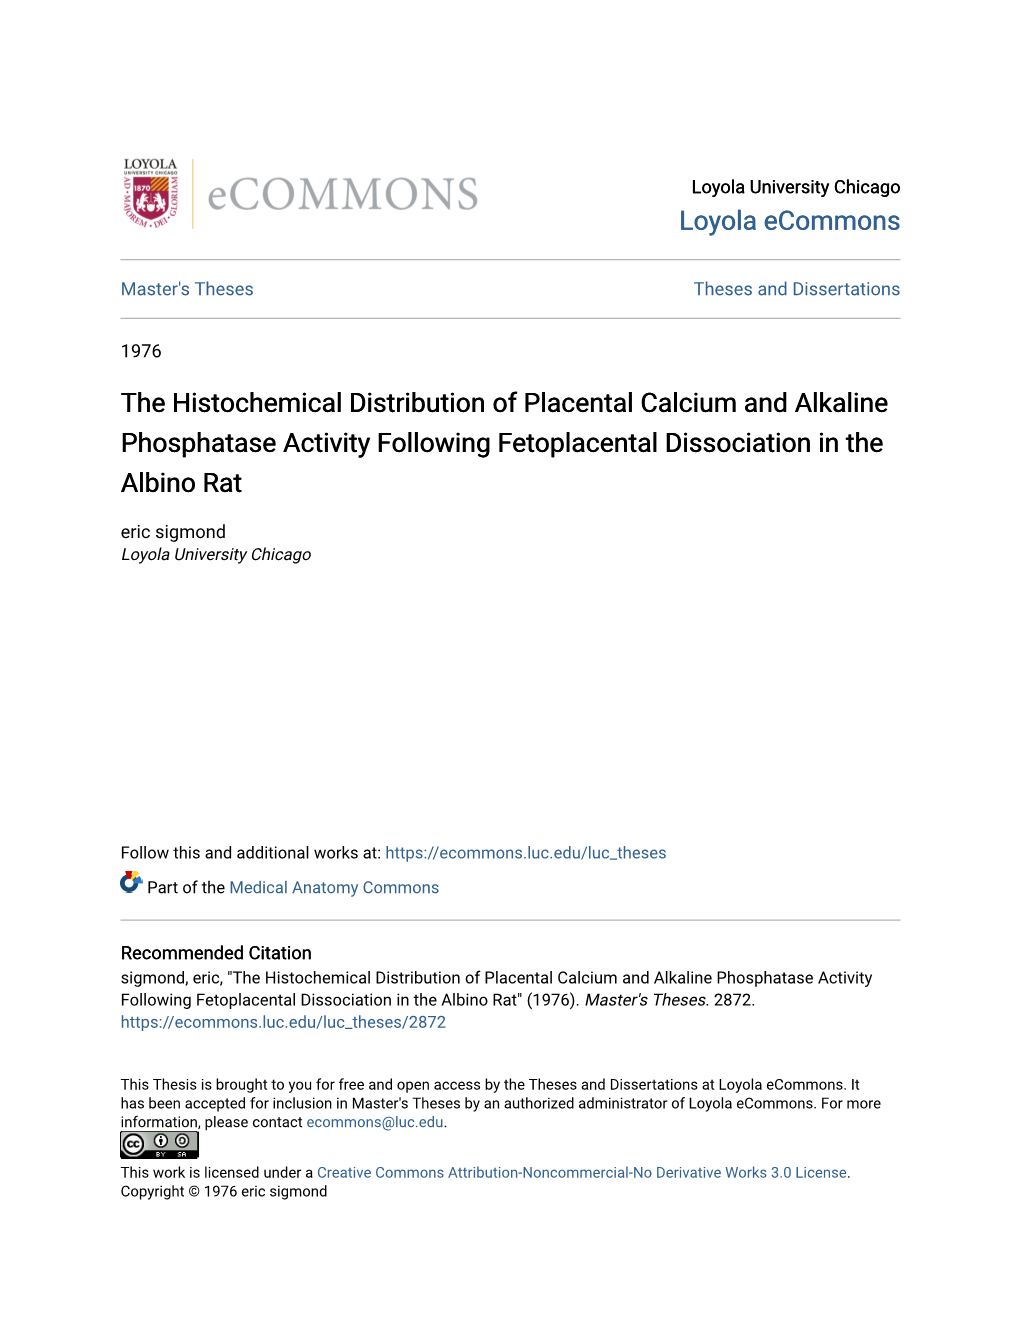 The Histochemical Distribution of Placental Calcium and Alkaline Phosphatase Activity Following Fetoplacental Dissociation in Th